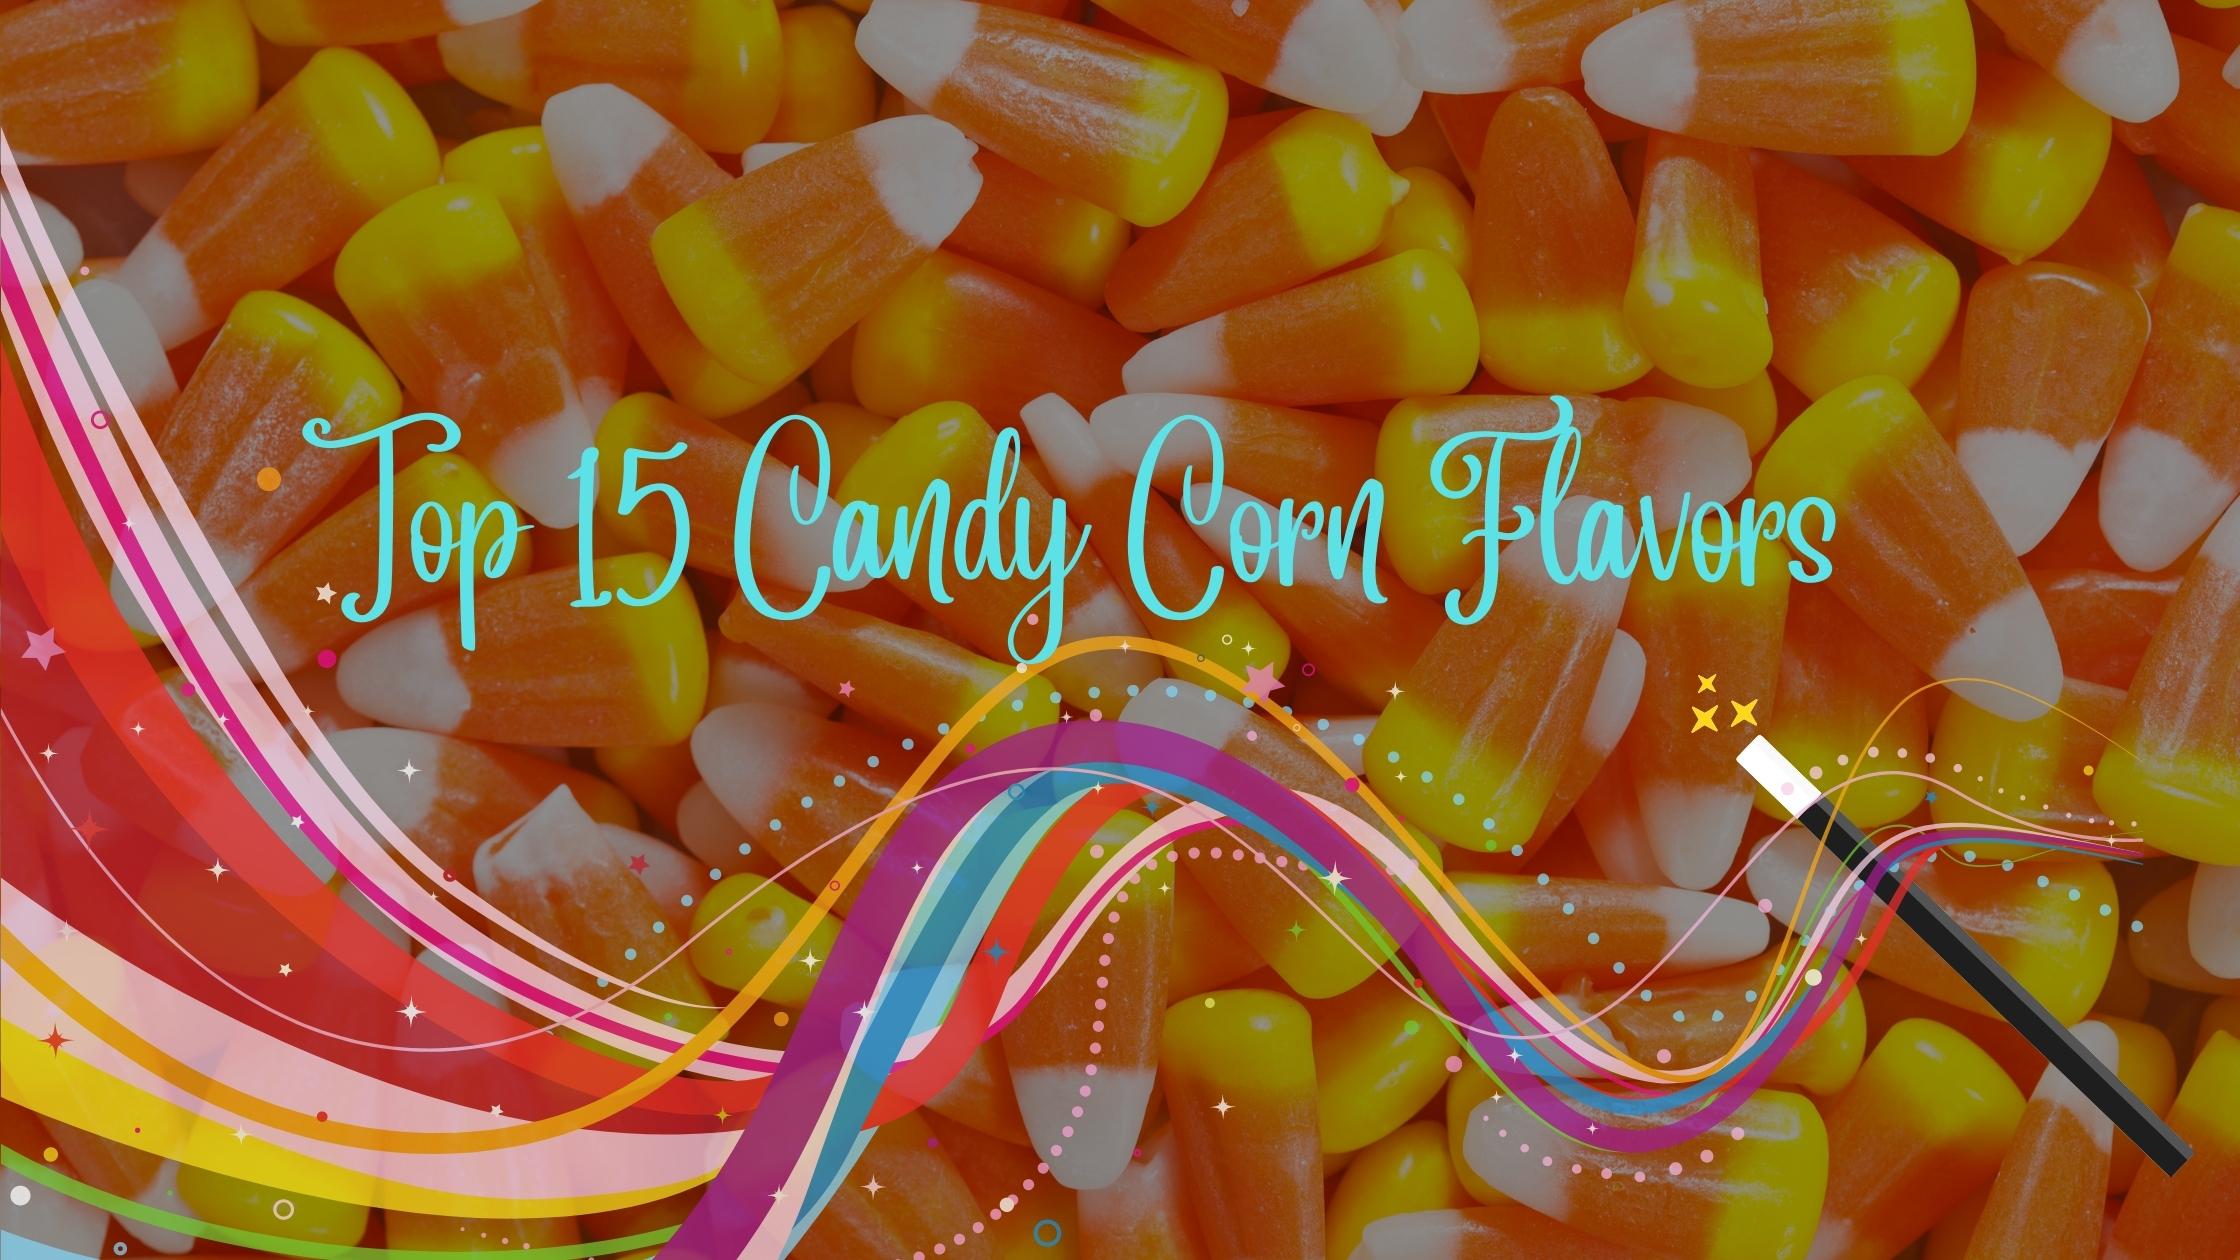 Top 15 Most Wonderful Candy Corn Flavors Ever Made